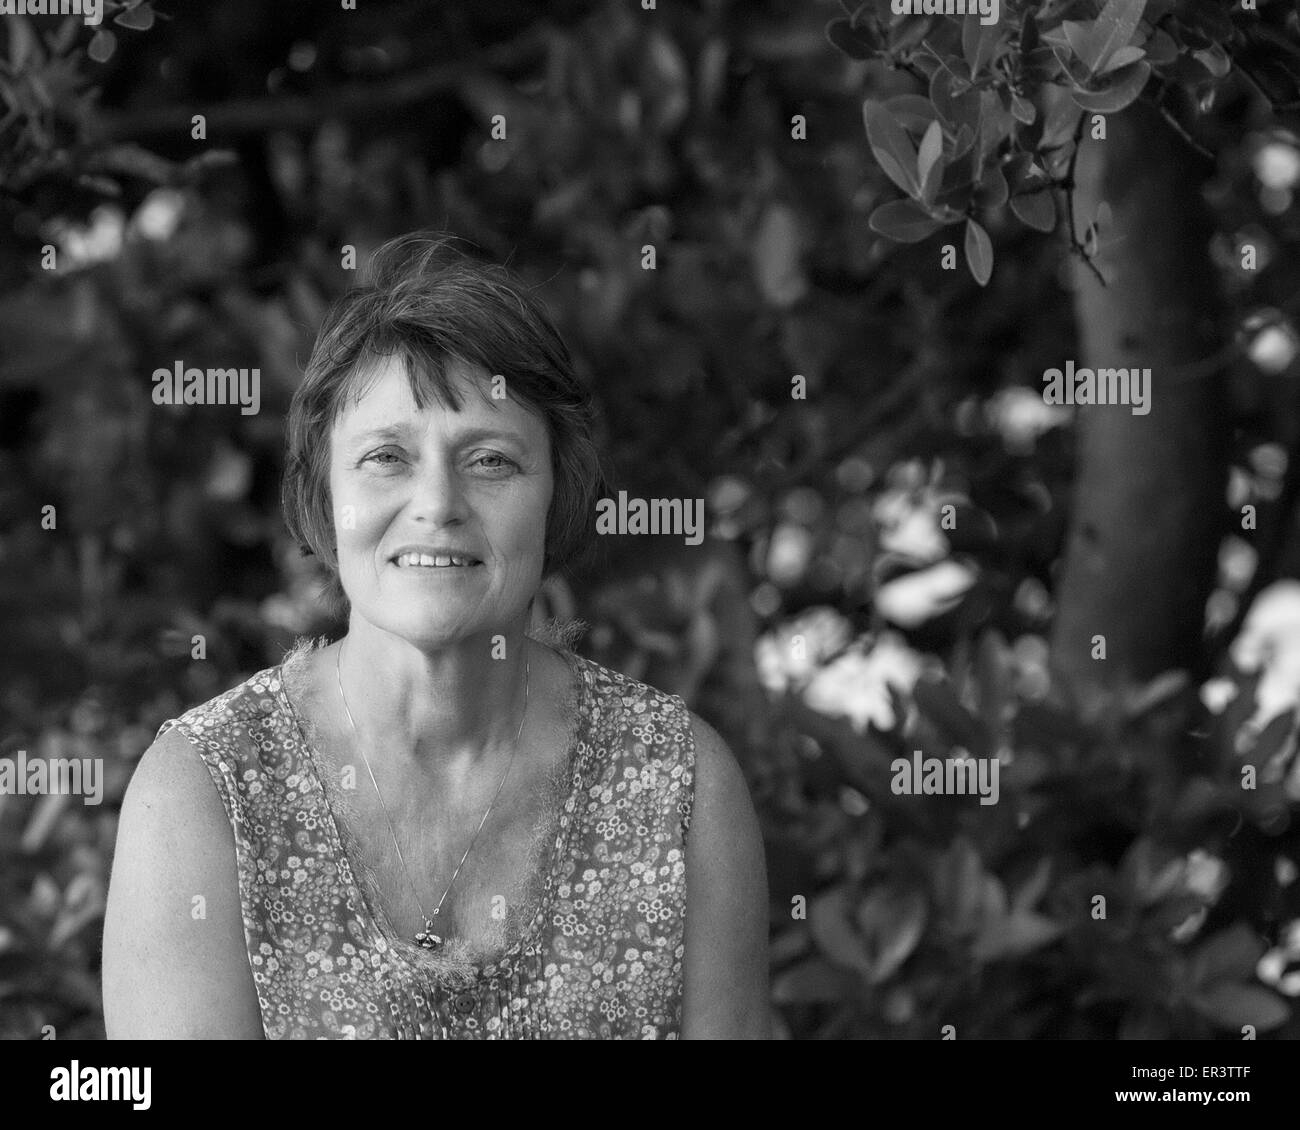 Senior woman sitting outside.  Looking at the camera.  Image is black and white.  Trees in the background. Stock Photo